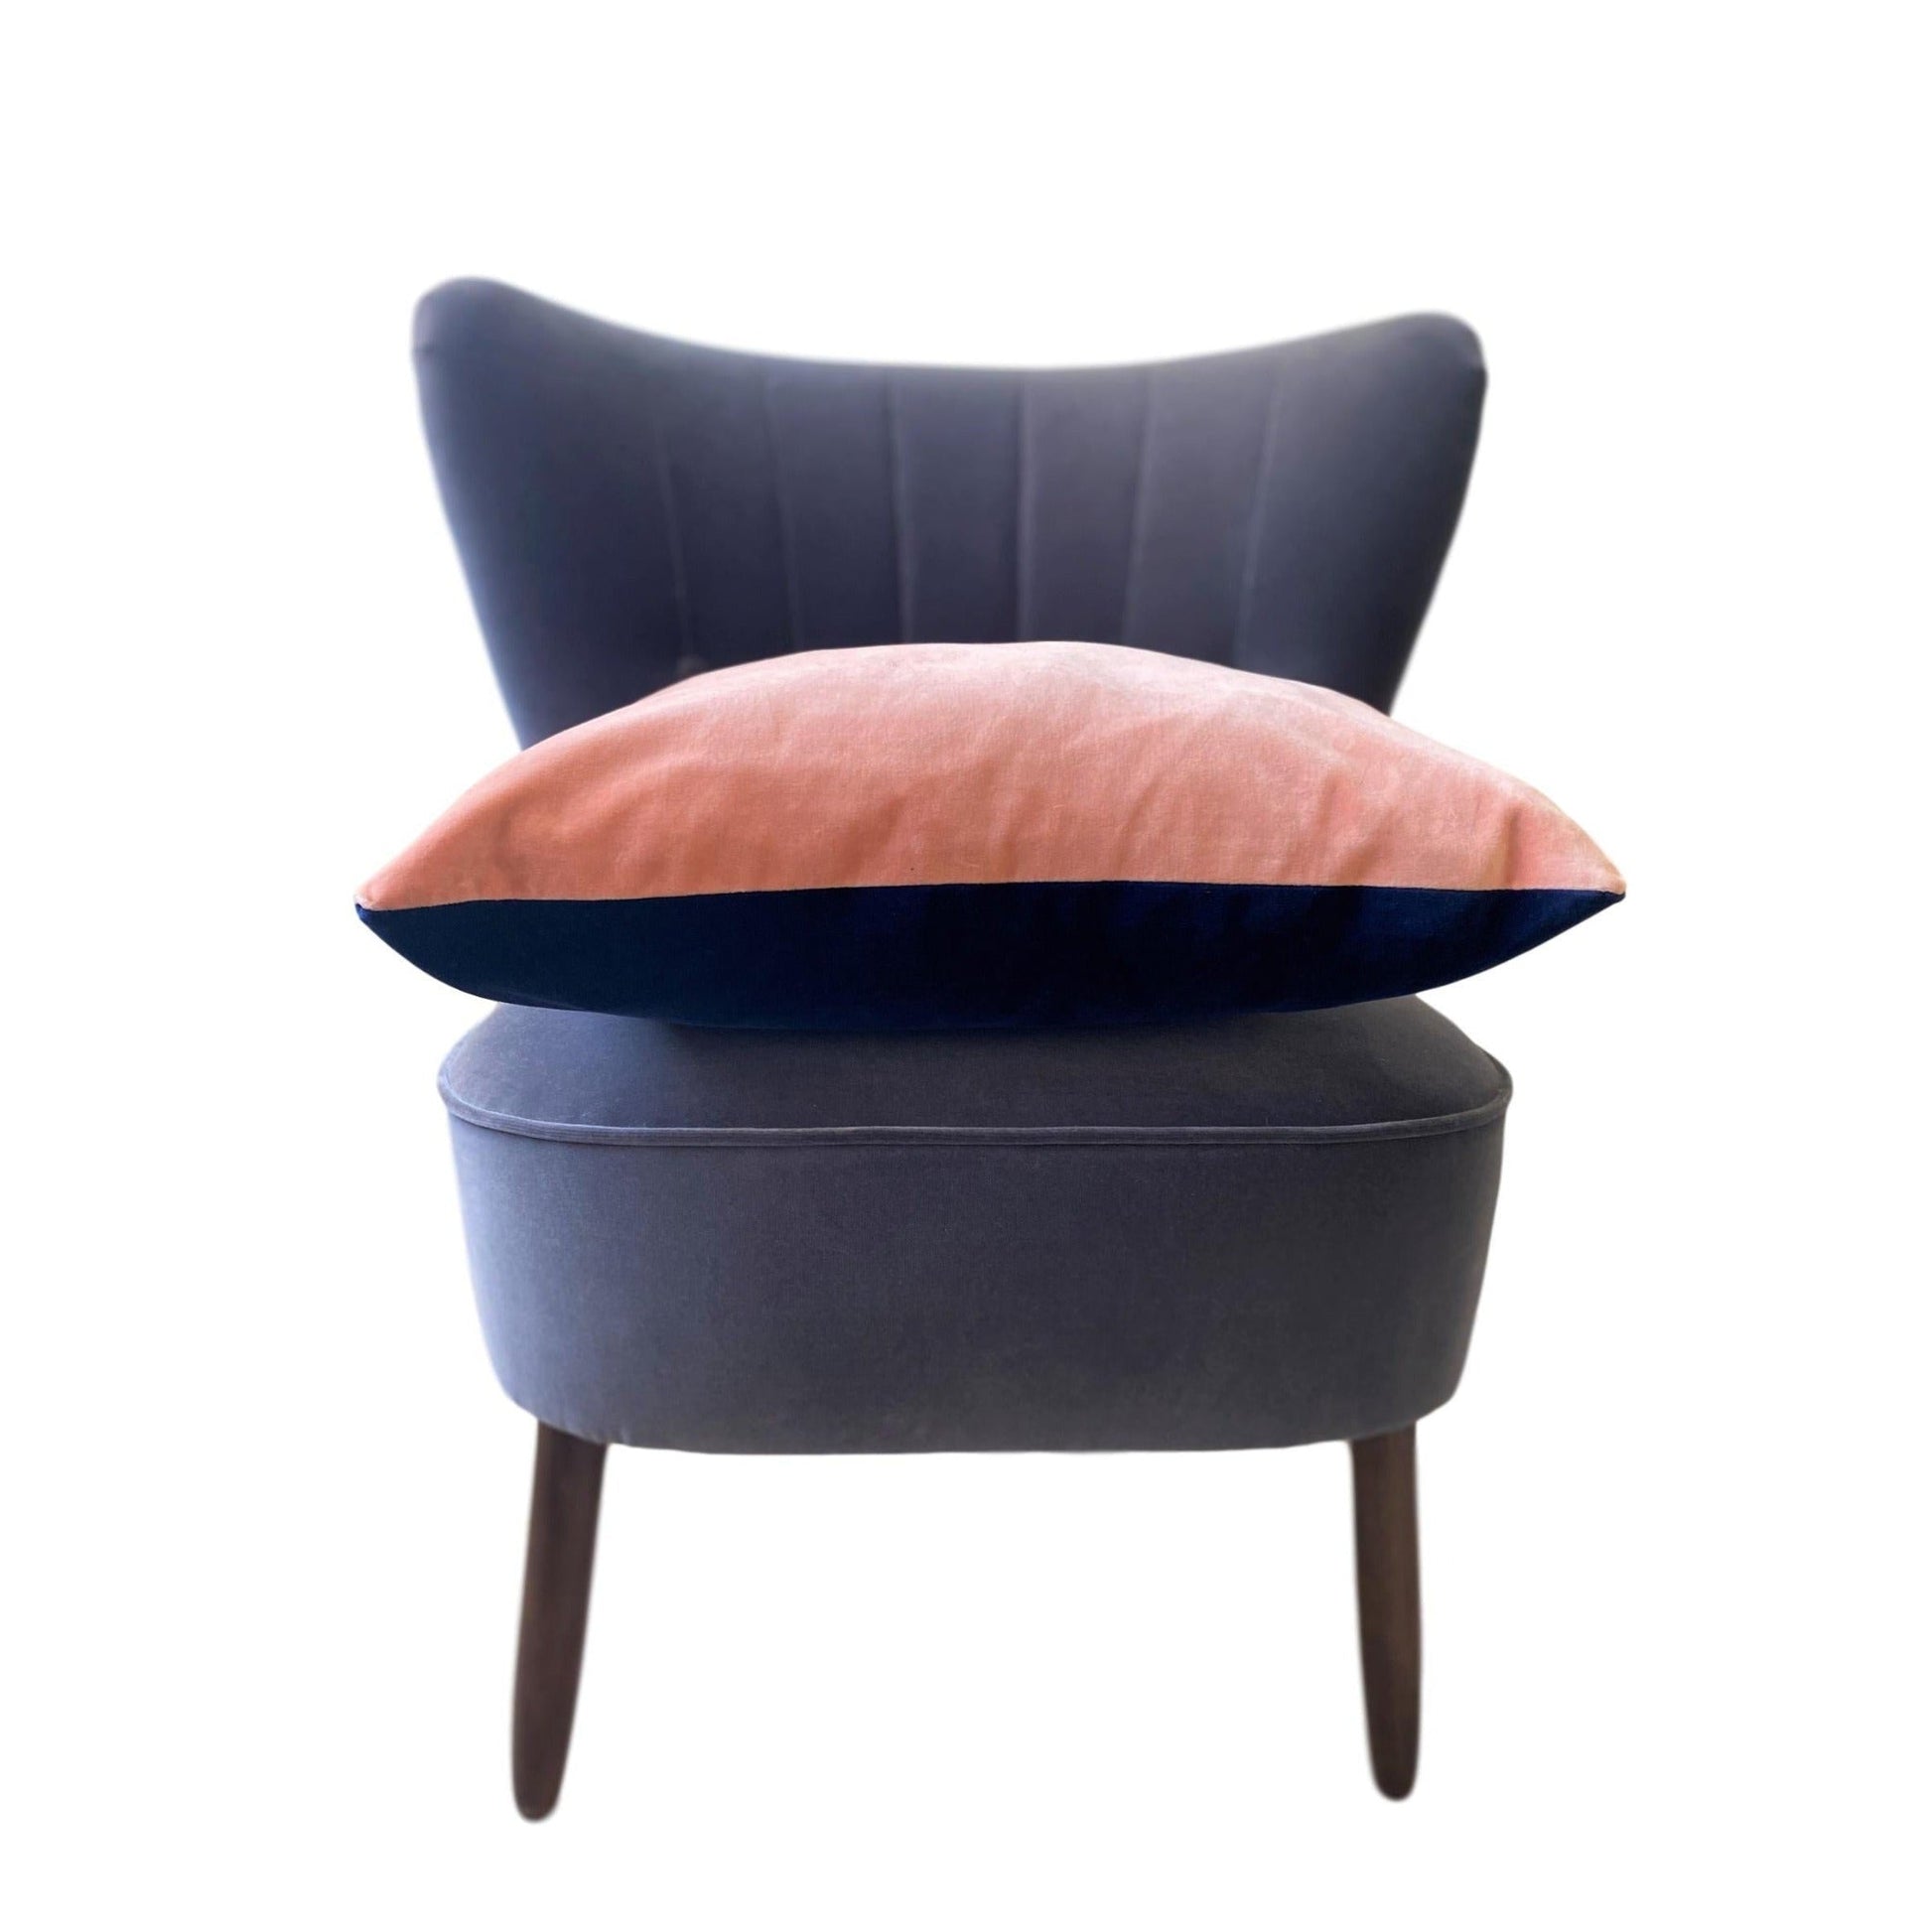 blush pink velvet cushion cover with navy by Luxe 39